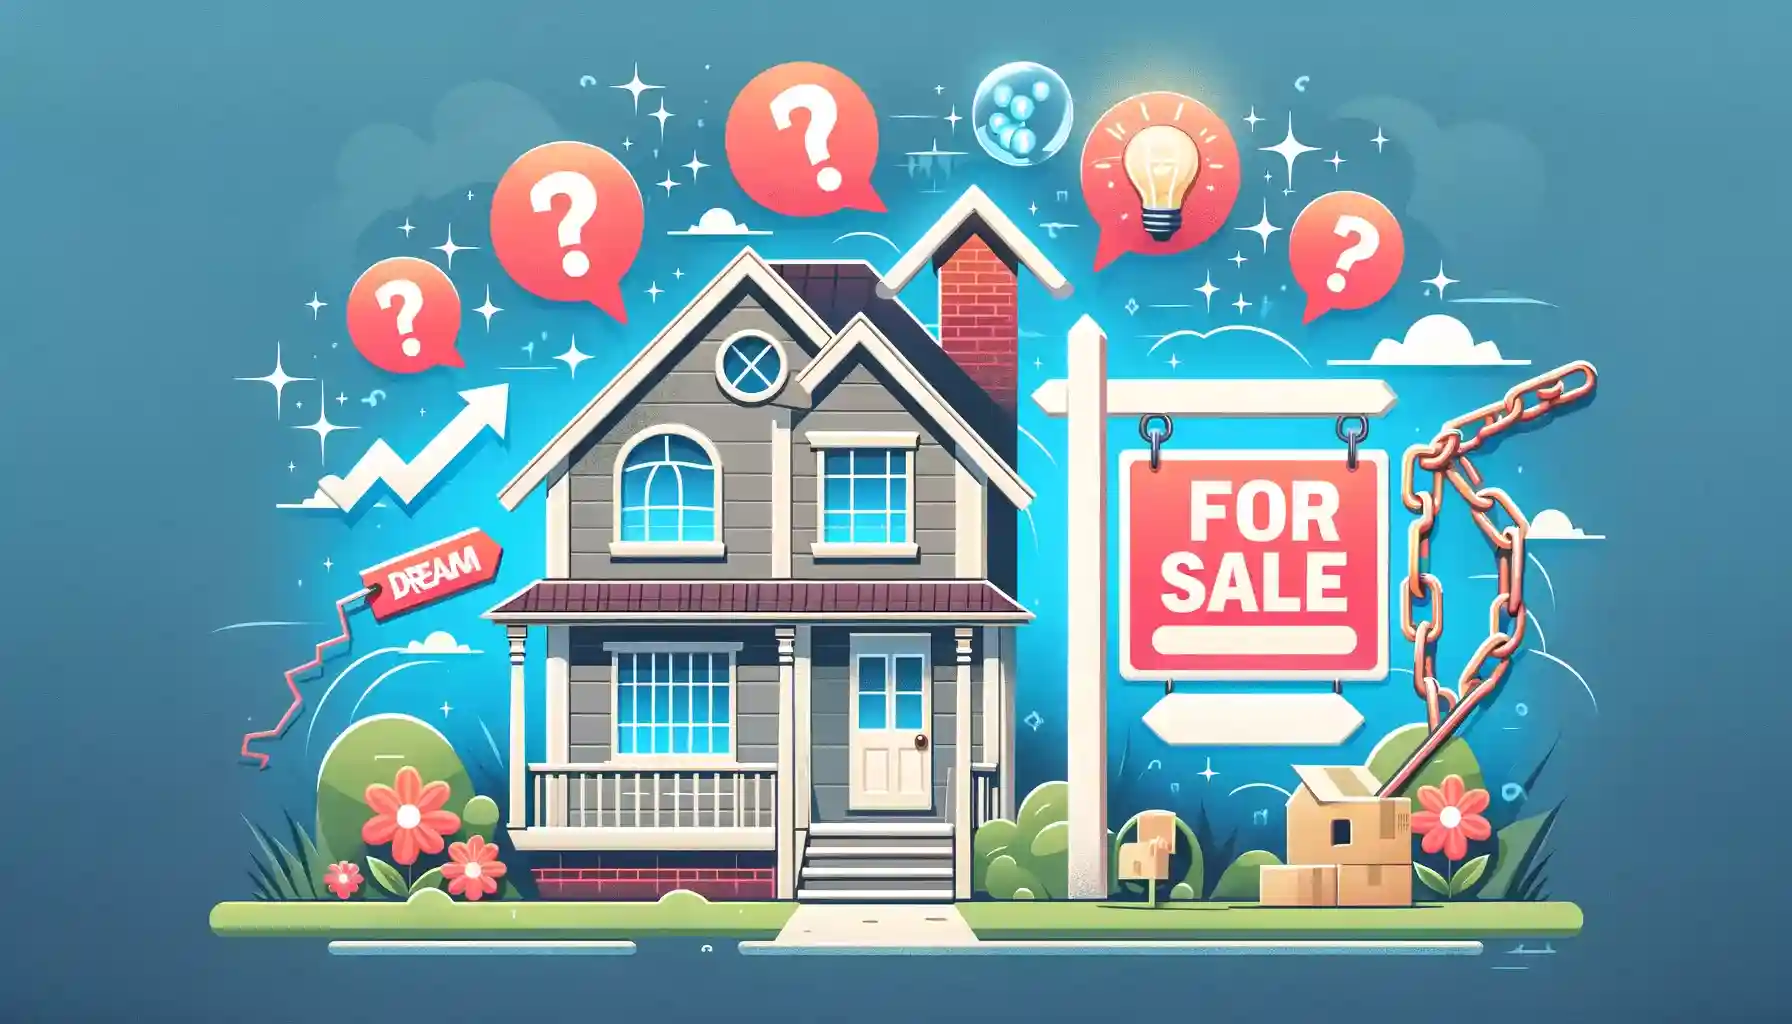 Debunking the Dream Deal: 5 Home-Selling Myths That Can Cost You